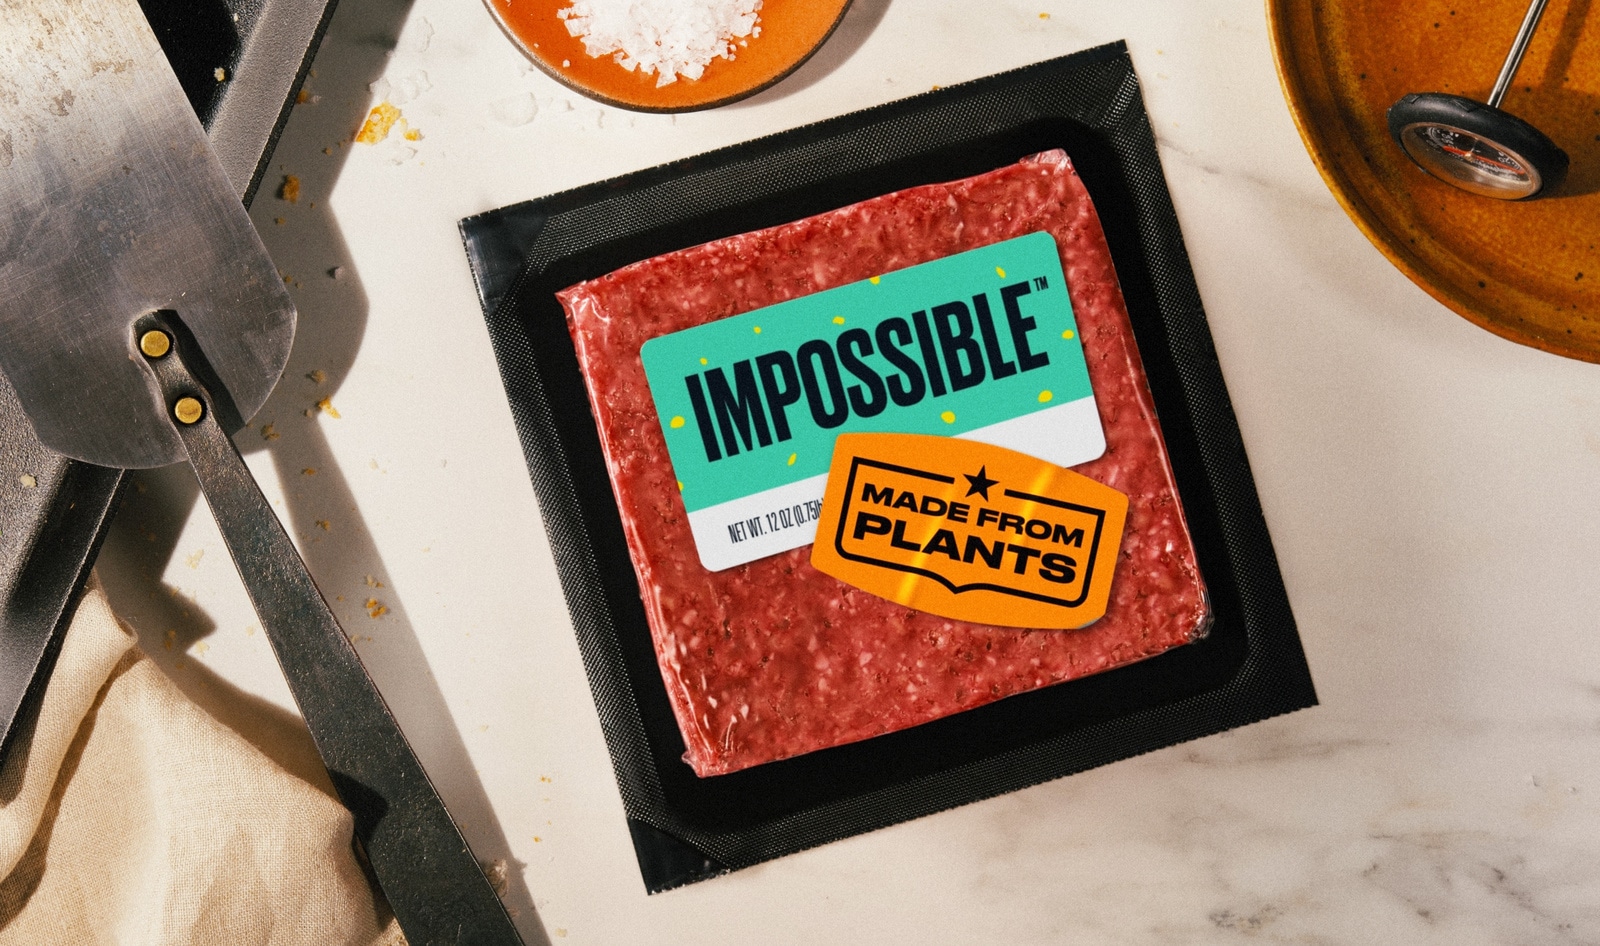 Rumor Has It: Impossible Foods to Go Public with $10 Billion IPO